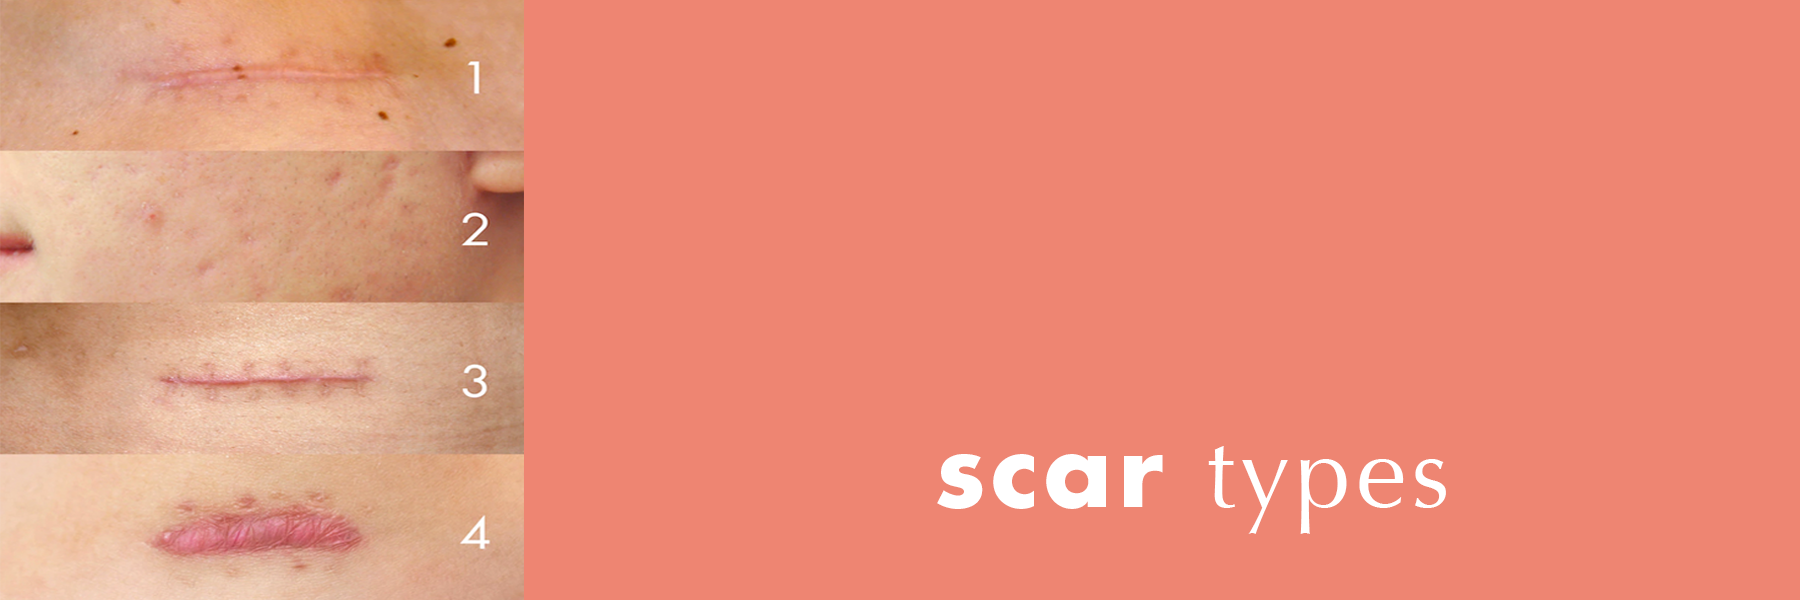 Types of scars